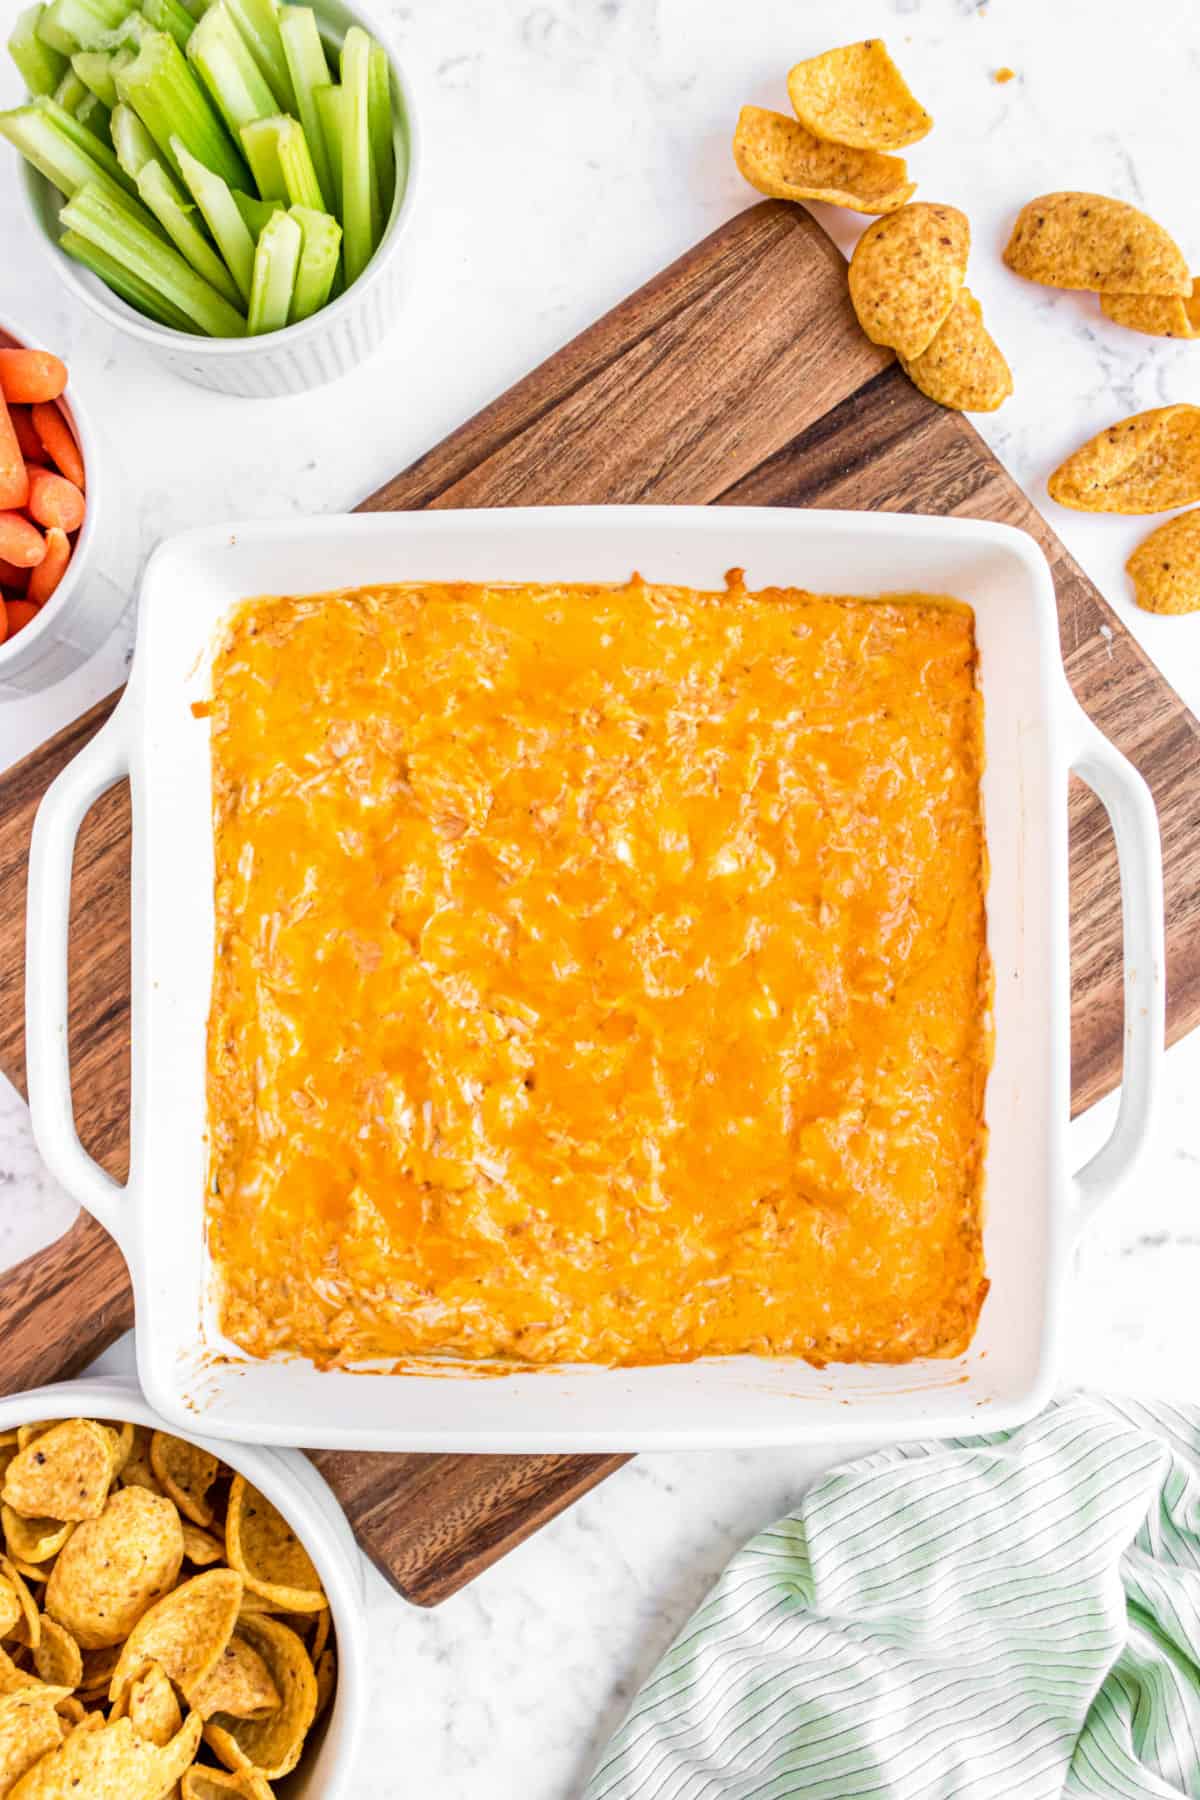 Baking dish with buffalo chicken dip and vegetables on the side.